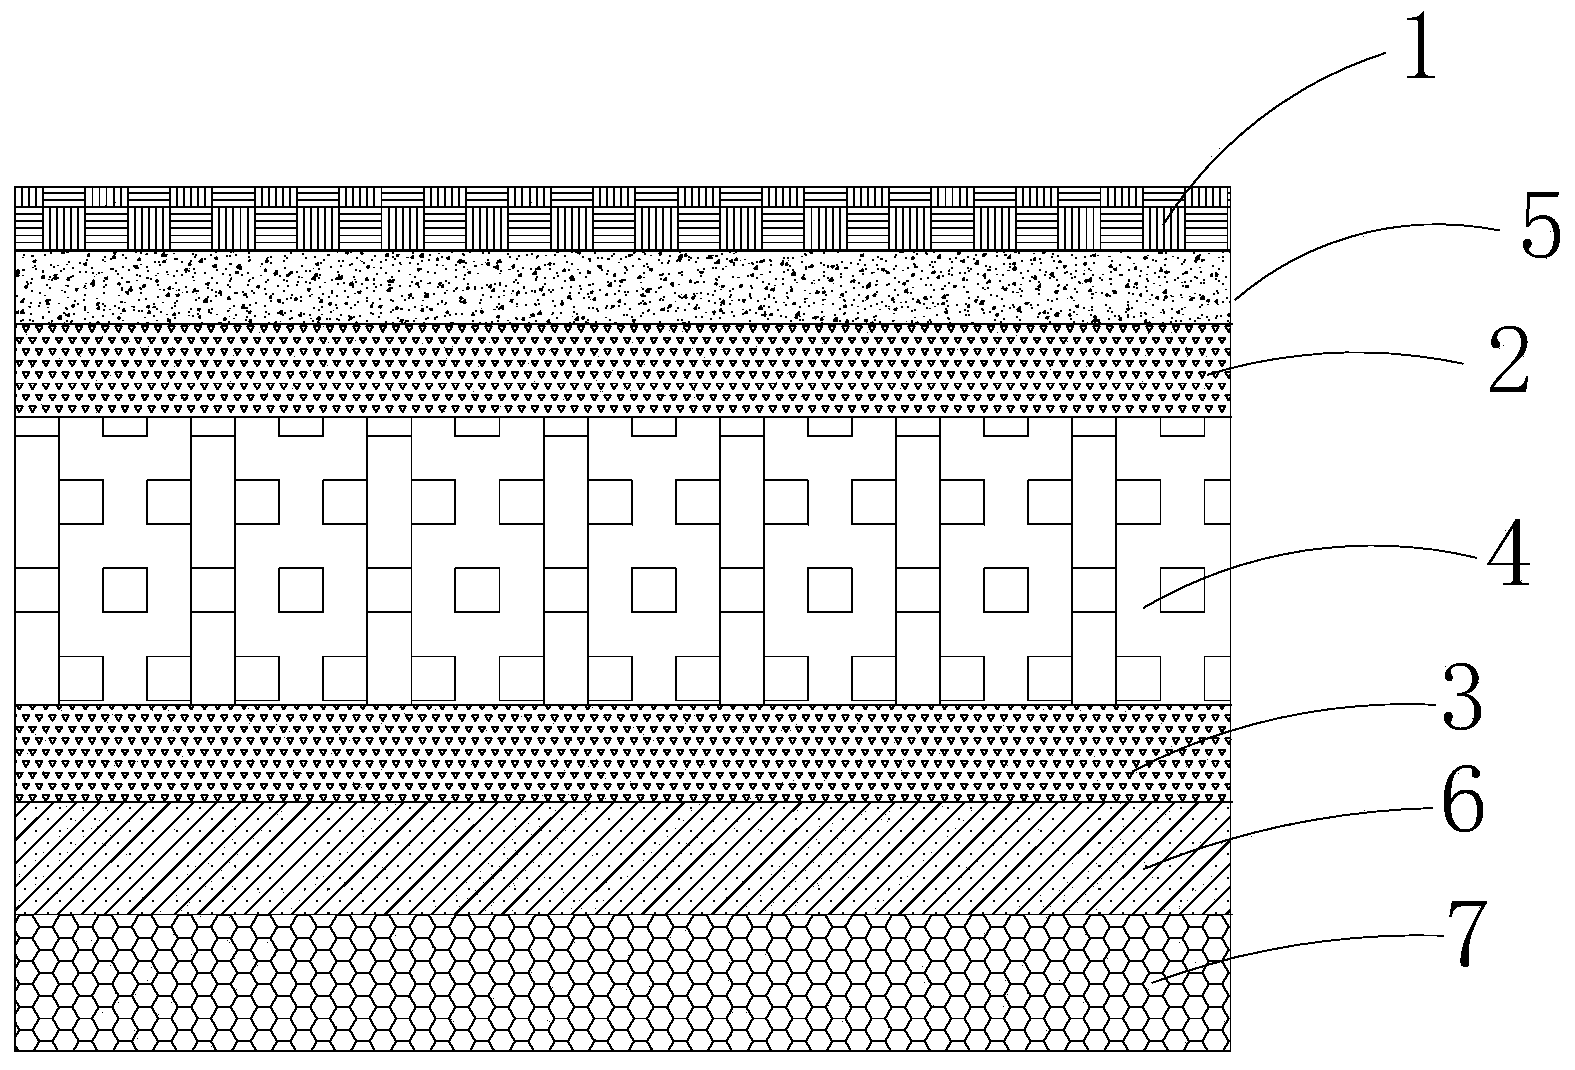 Gel heating pad and method for manufacturing same